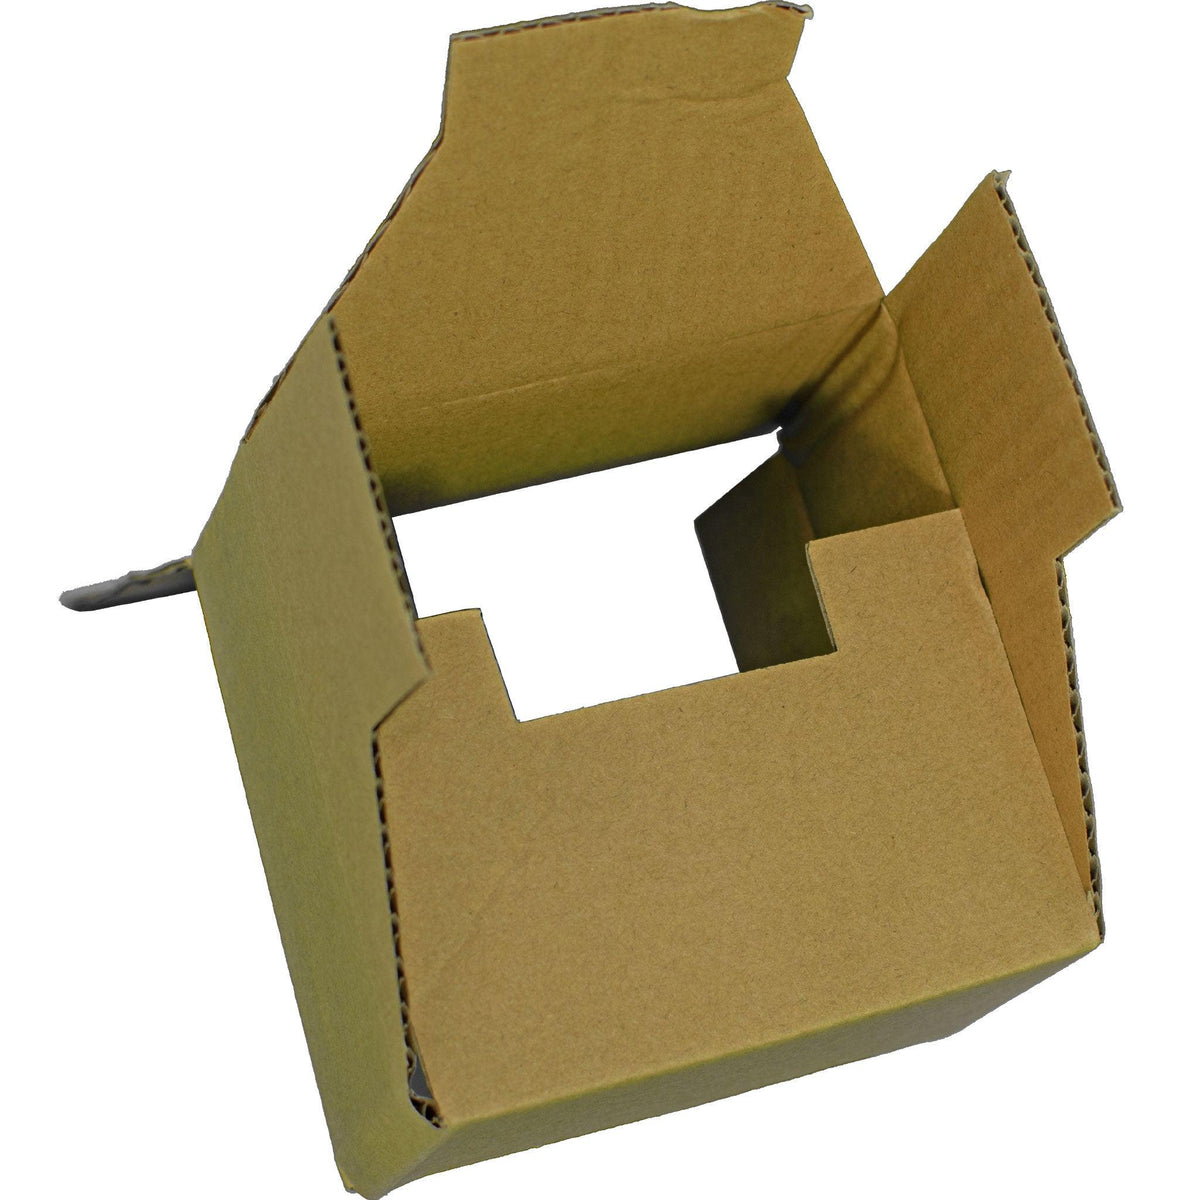 Purchase brand new empty Cardboard Boxes for your C-9 Light Bulbs from Lee Display.    Organize your holiday lights, store your bulbs safely, and keep them safe from water damage.  On sale now at leedisplay.com